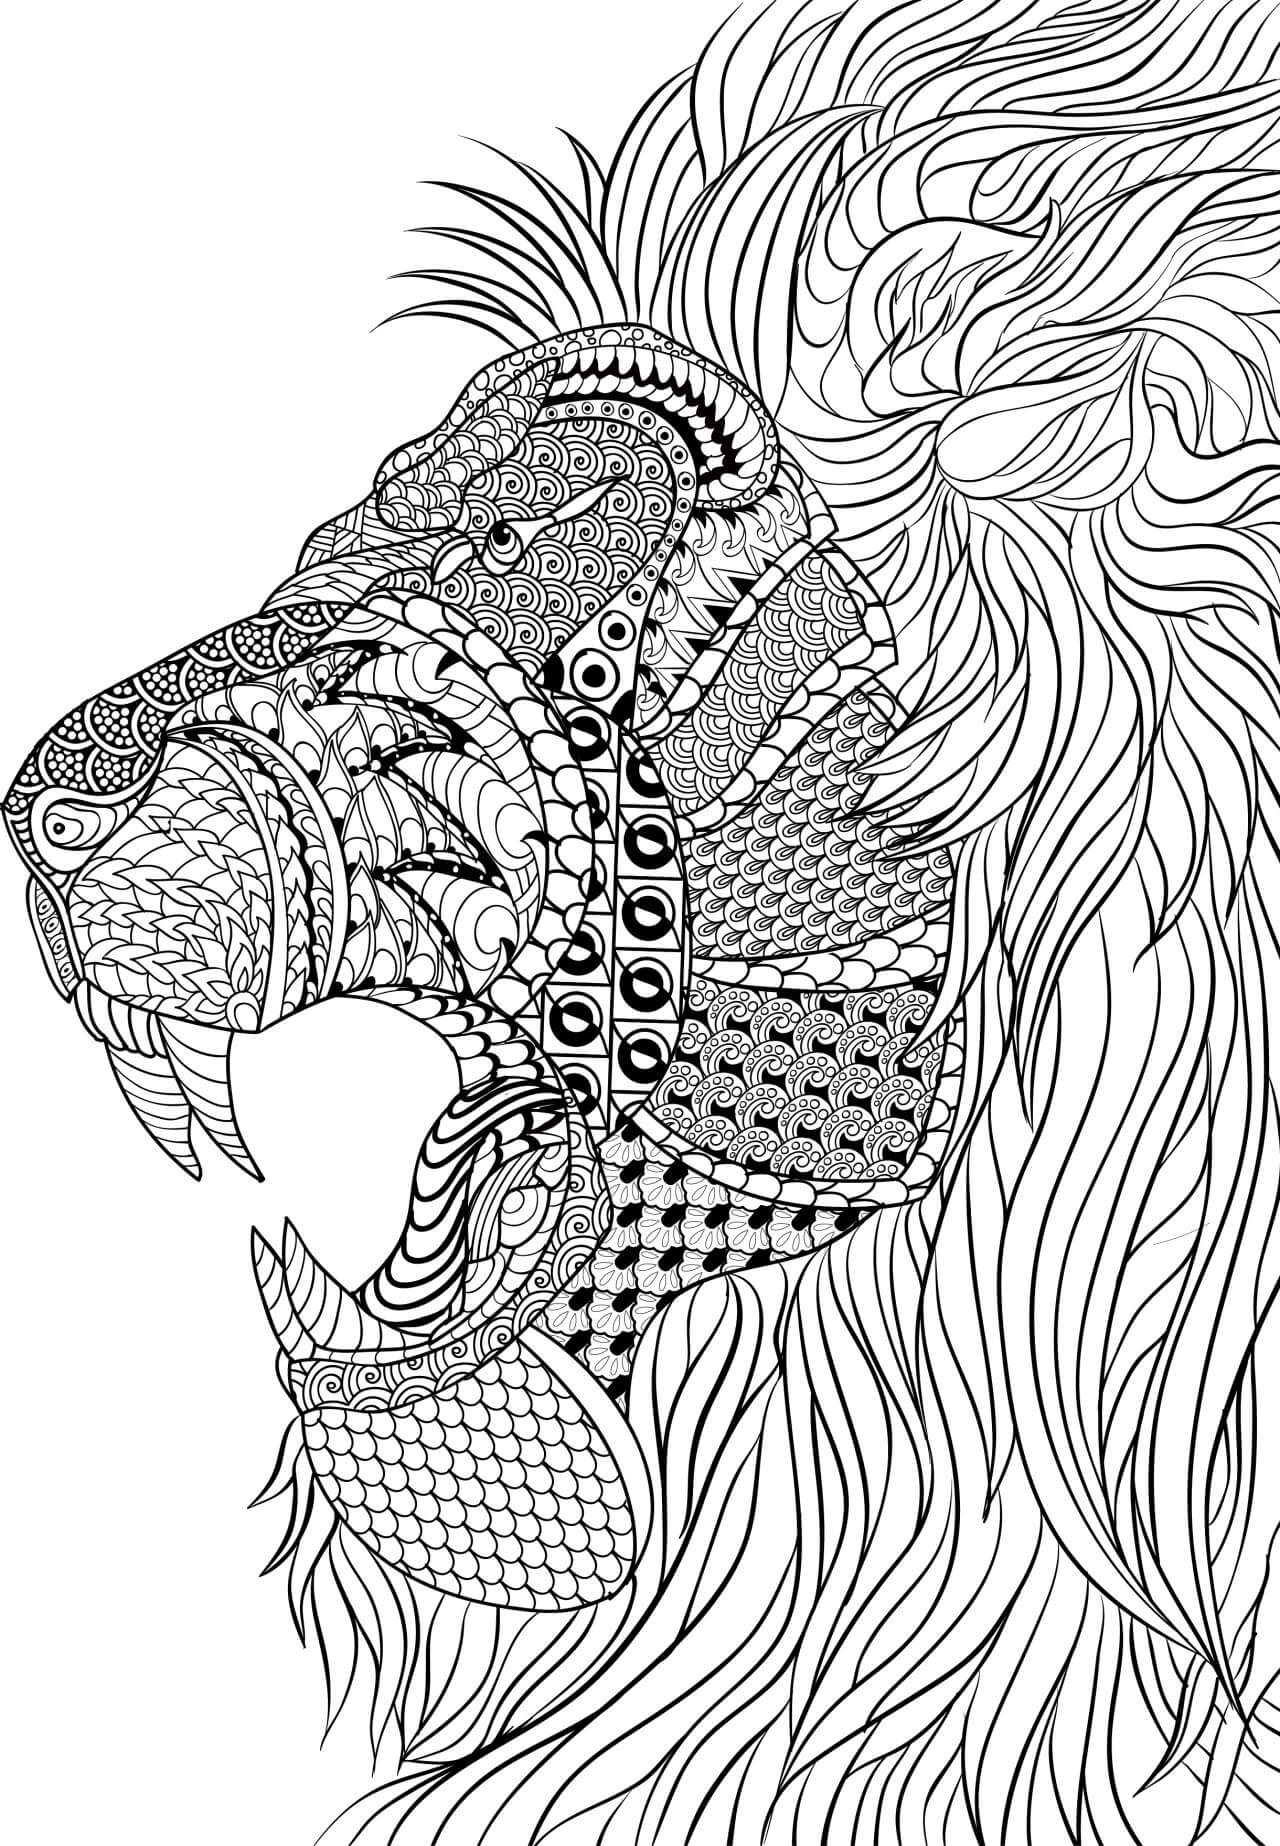 Difficult Coloring Pages For Adults
 Coloring Pages For Adults Difficult Animals 4